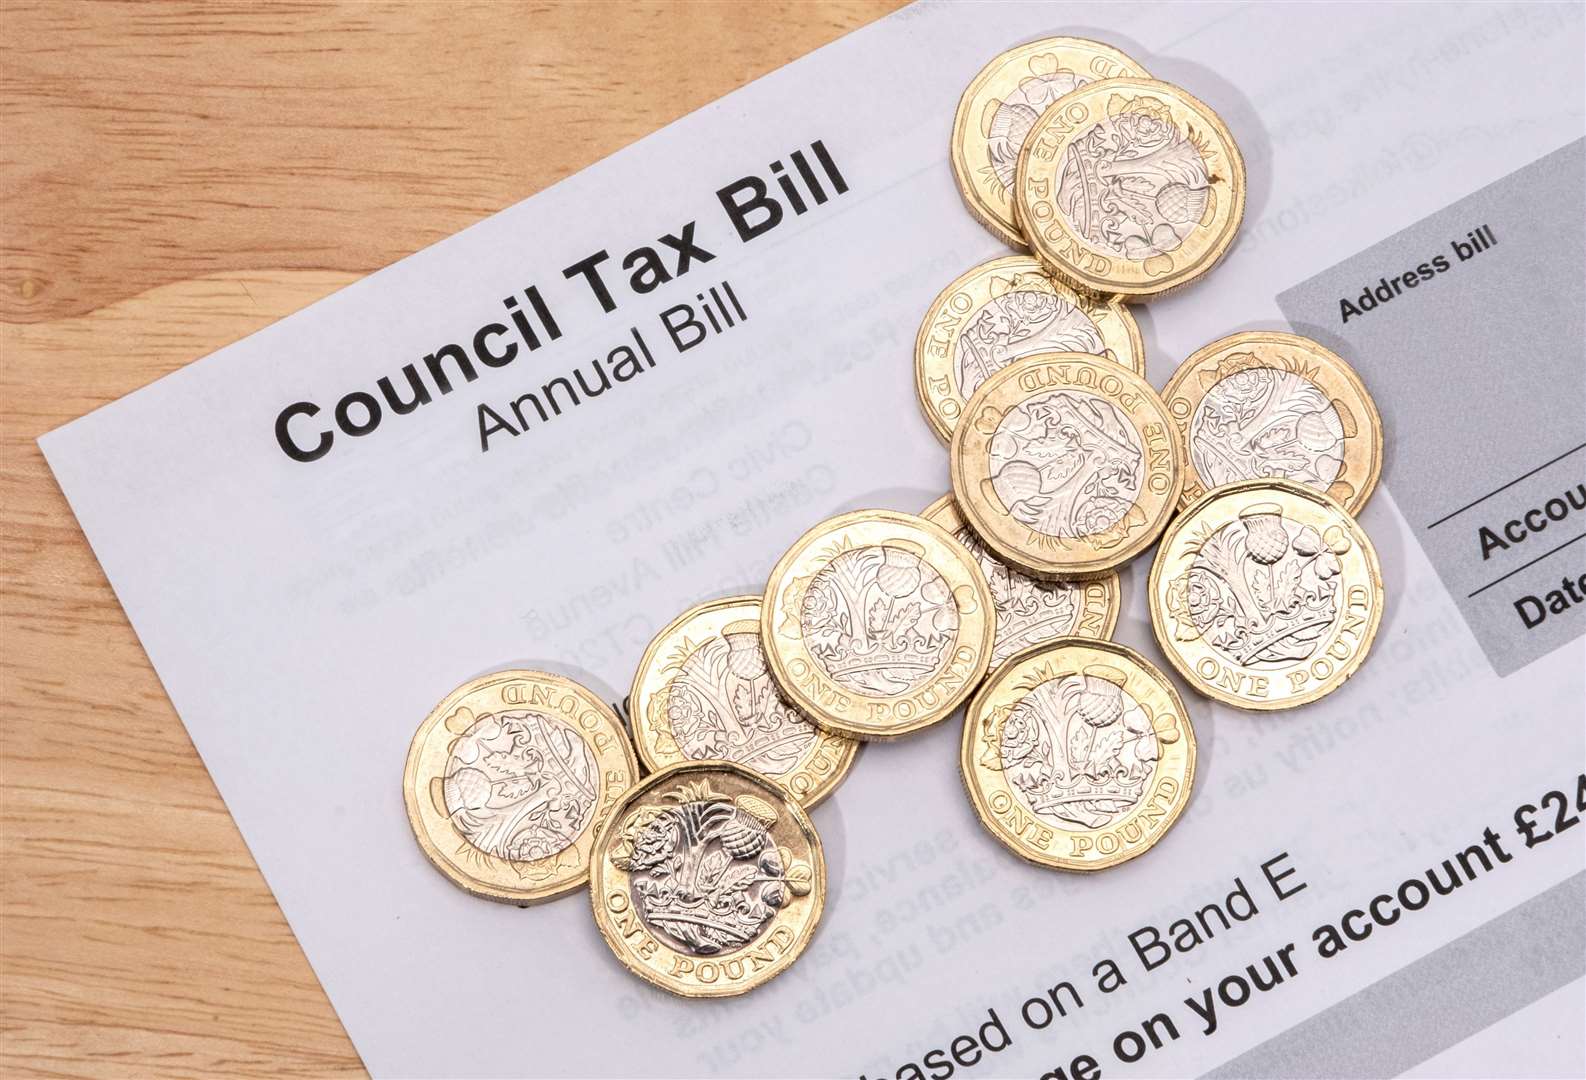 UK one pound coins placed on a Council Tax Bill.